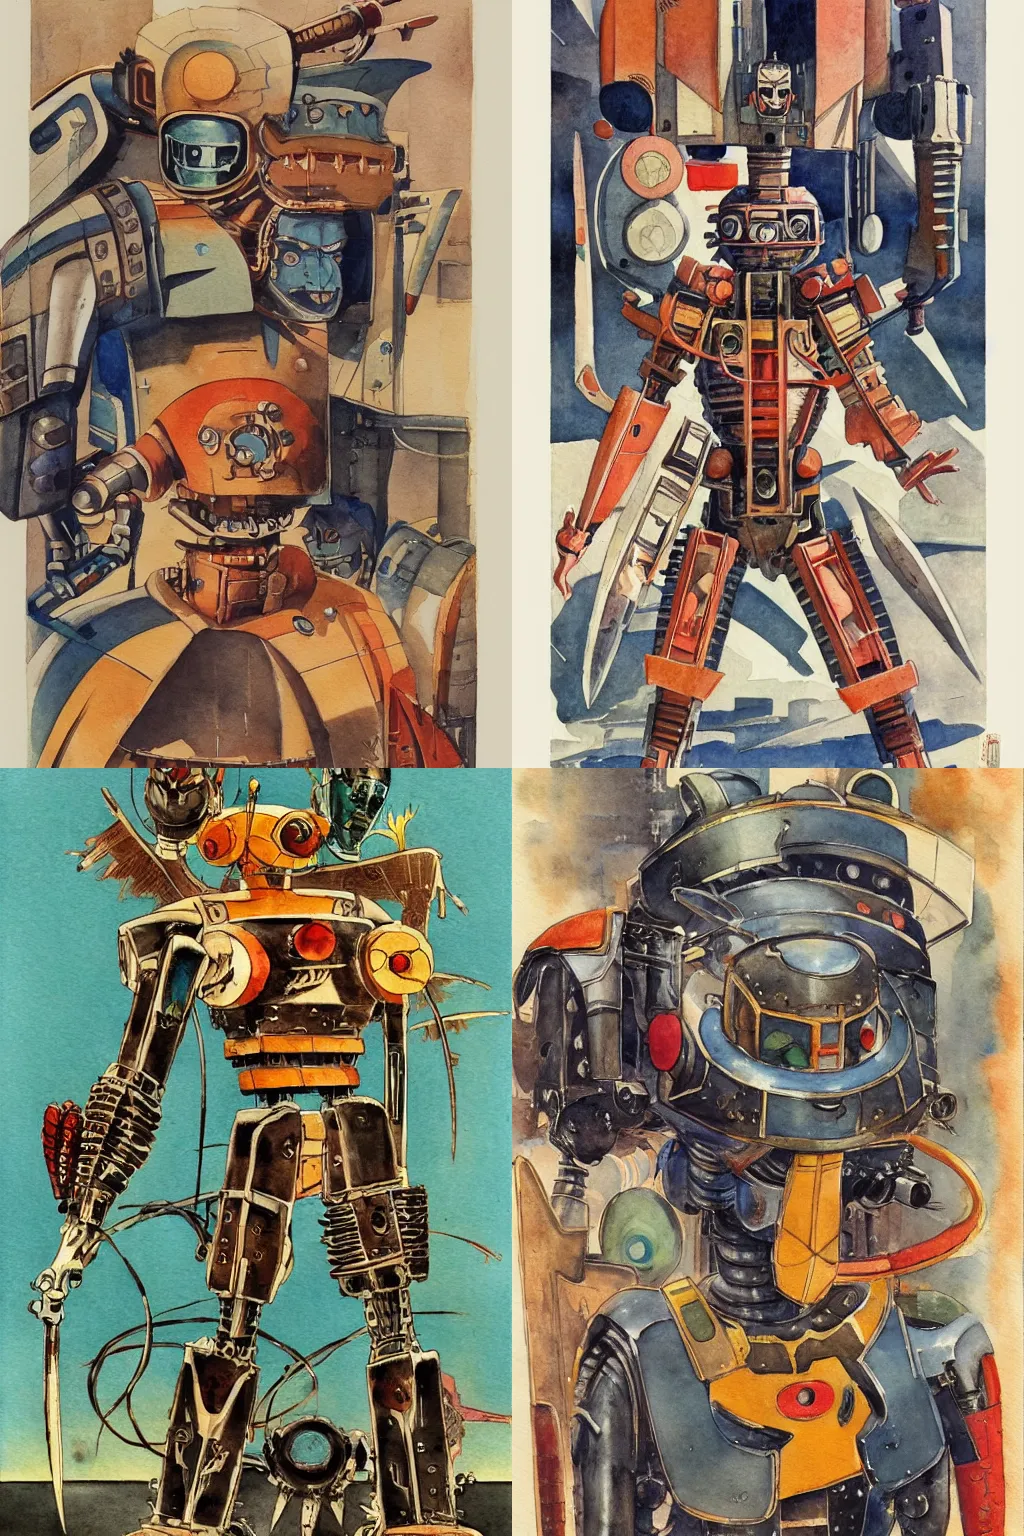 Prompt: vintage anime cinematic robot warrior by Victor Brauner, watercolor concept art by Syd Mead, by william herbert dunton, watercolor strokes, japanese woodblock, by Jean Giraud